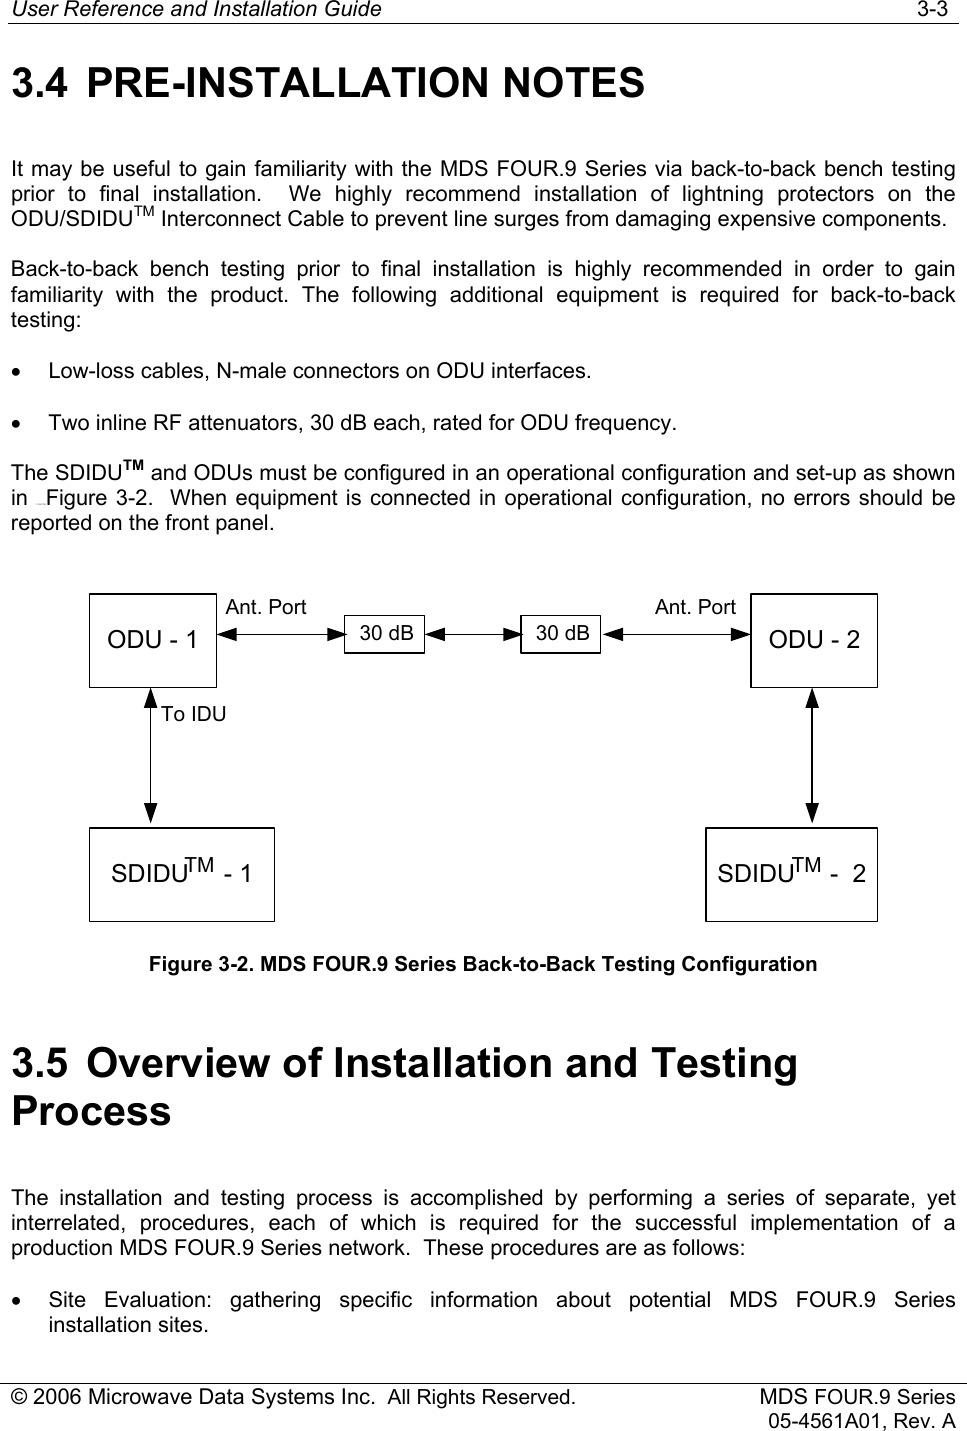 User Reference and Installation Guide   3-3 © 2006 Microwave Data Systems Inc.  All Rights Reserved. MDS FOUR.9 Series 05-4561A01, Rev. A 3.4 PRE-INSTALLATION NOTES It may be useful to gain familiarity with the MDS FOUR.9 Series via back-to-back bench testing prior to final installation.  We highly recommend installation of lightning protectors on the ODU/SDIDUTM Interconnect Cable to prevent line surges from damaging expensive components. Back-to-back bench testing prior to final installation is highly recommended in order to gain familiarity with the product. The following additional equipment is required for back-to-back testing: •  Low-loss cables, N-male connectors on ODU interfaces. •  Two inline RF attenuators, 30 dB each, rated for ODU frequency. The SDIDUTM and ODUs must be configured in an operational configuration and set-up as shown in 175H172HFigure 3-2.  When equipment is connected in operational configuration, no errors should be reported on the front panel.  ODU - 1SDIDU     - 1To IDUAnt. PortODU - 2SDIDU     -  230 dB 30 dBTM TMAnt. Port Figure 3-2. MDS FOUR.9 Series Back-to-Back Testing Configuration 3.5  Overview of Installation and Testing Process The installation and testing process is accomplished by performing a series of separate, yet interrelated, procedures, each of which is required for the successful implementation of a production MDS FOUR.9 Series network.  These procedures are as follows: •  Site Evaluation: gathering specific information about potential MDS FOUR.9 Series installation sites. 